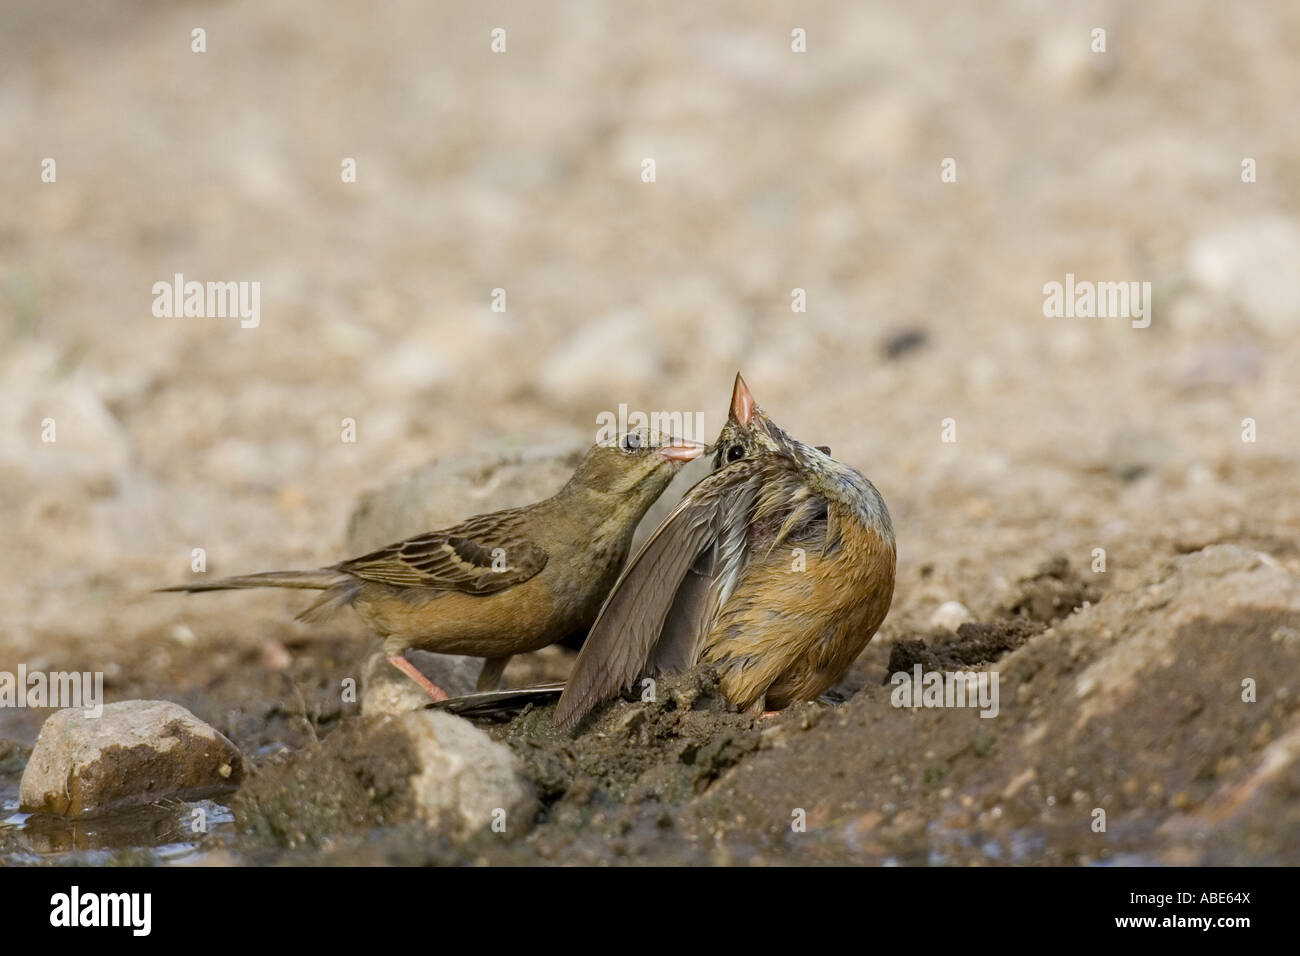 Ortolan Bunting courtship display. Male gently pulling female's crown feathers Stock Photo